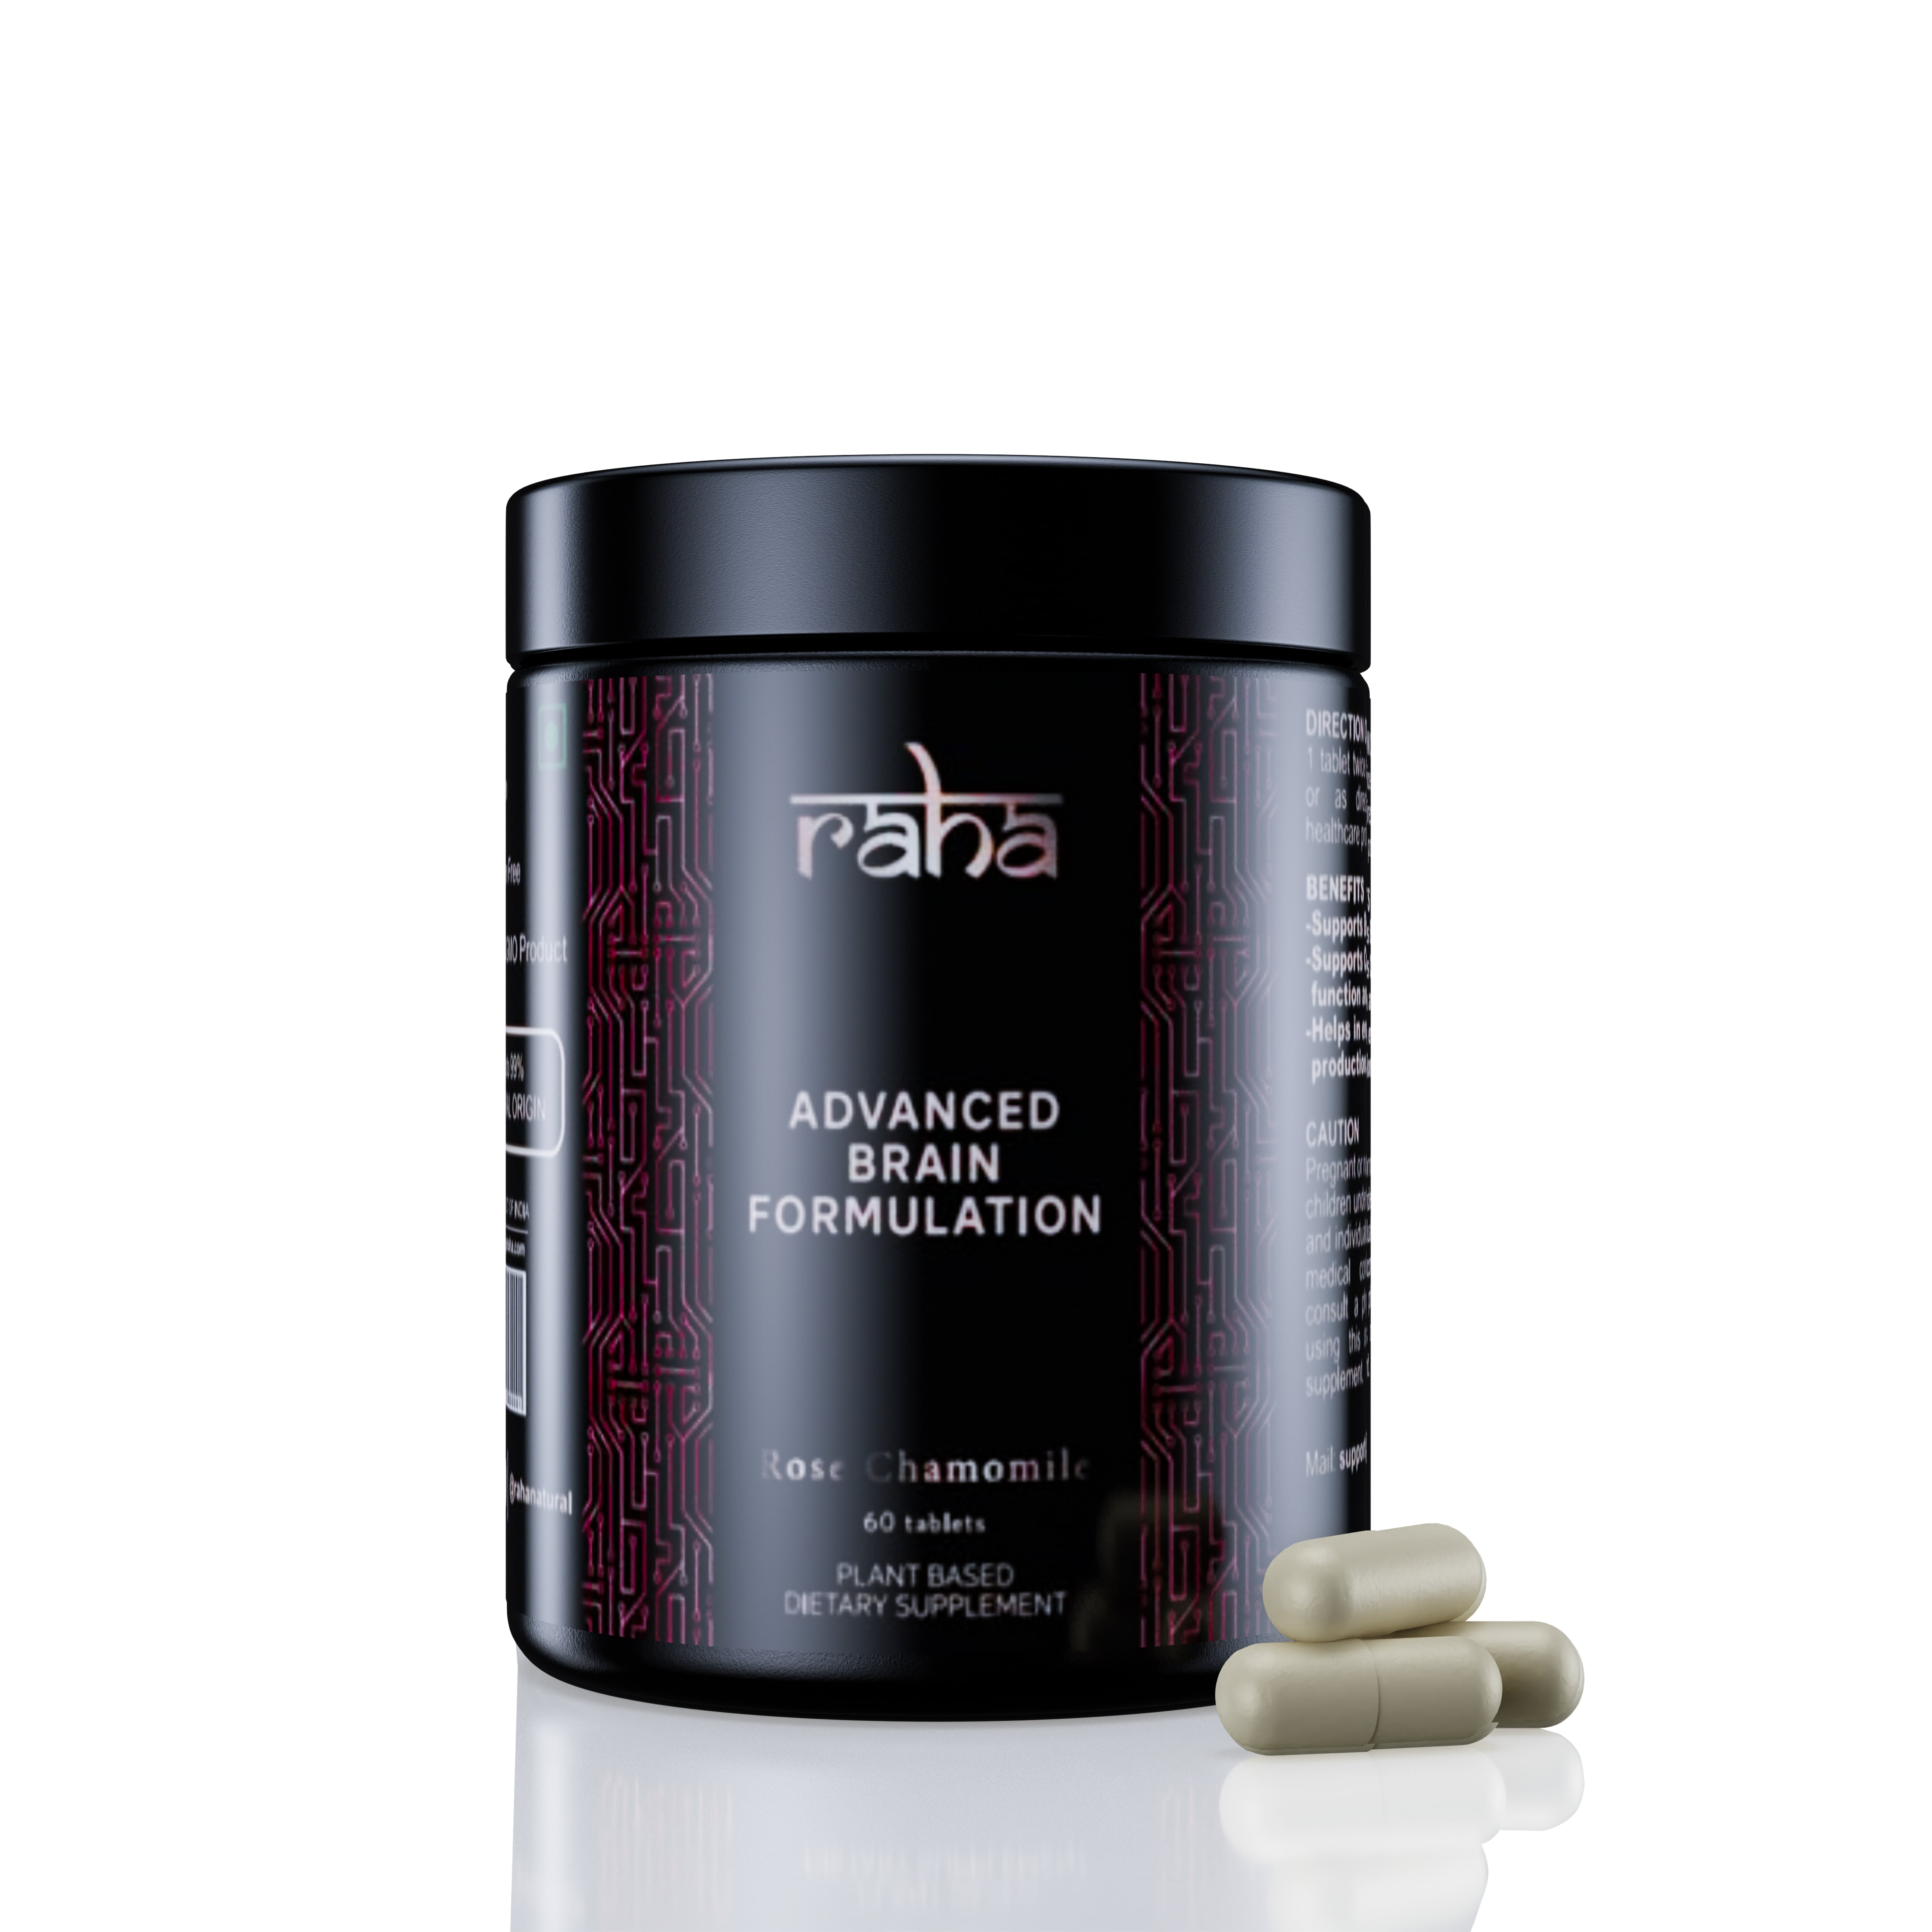 Raha advanced brain formulation for reducing stress and improving brain functions